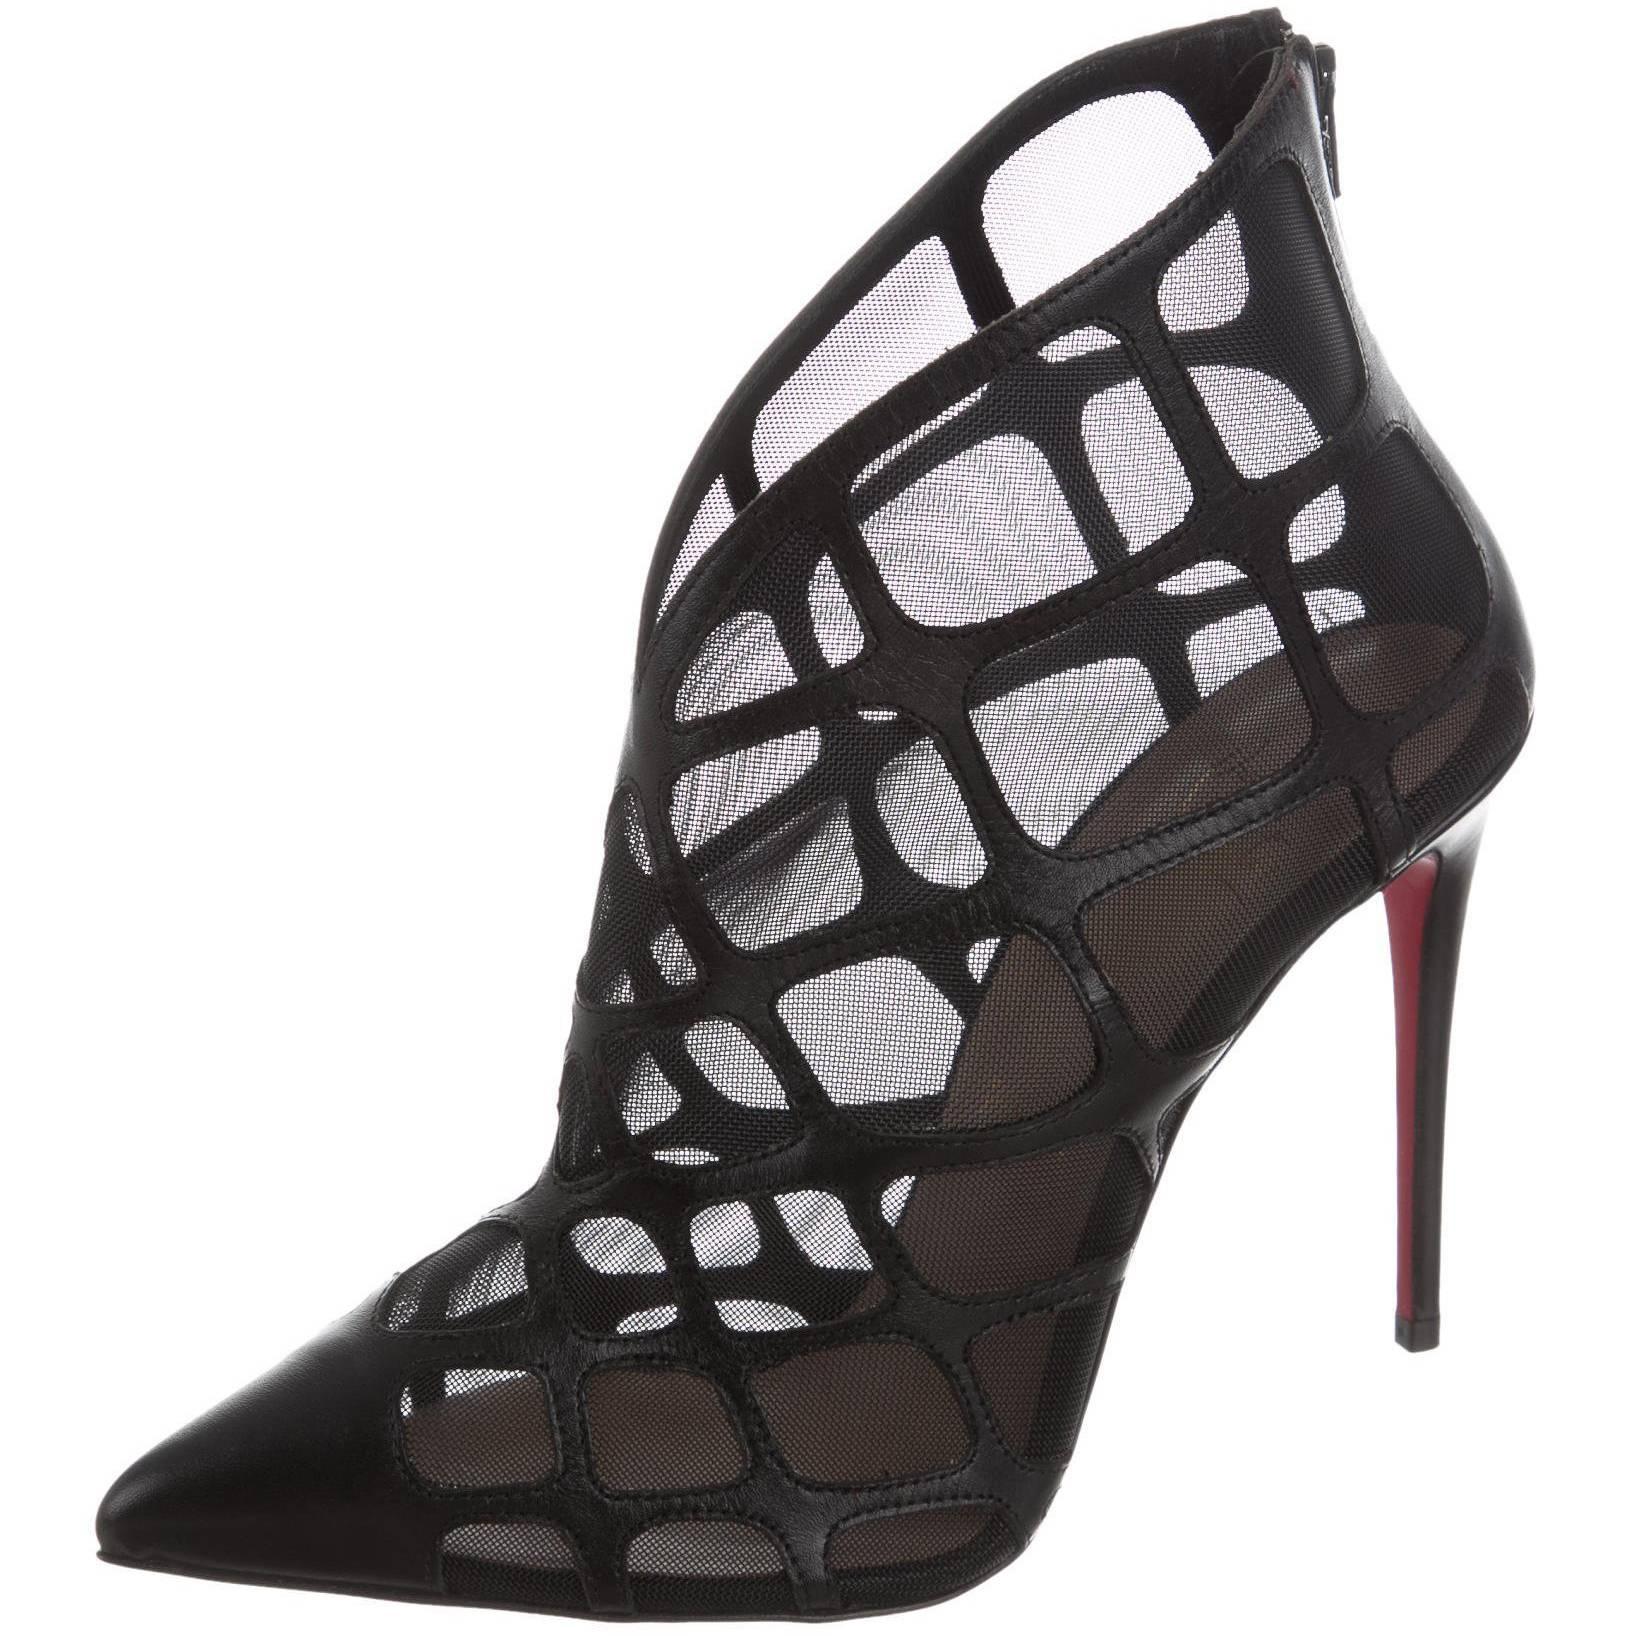 Christian Louboutin New Black Leather Mesh Ankle Boots Booties in Box 